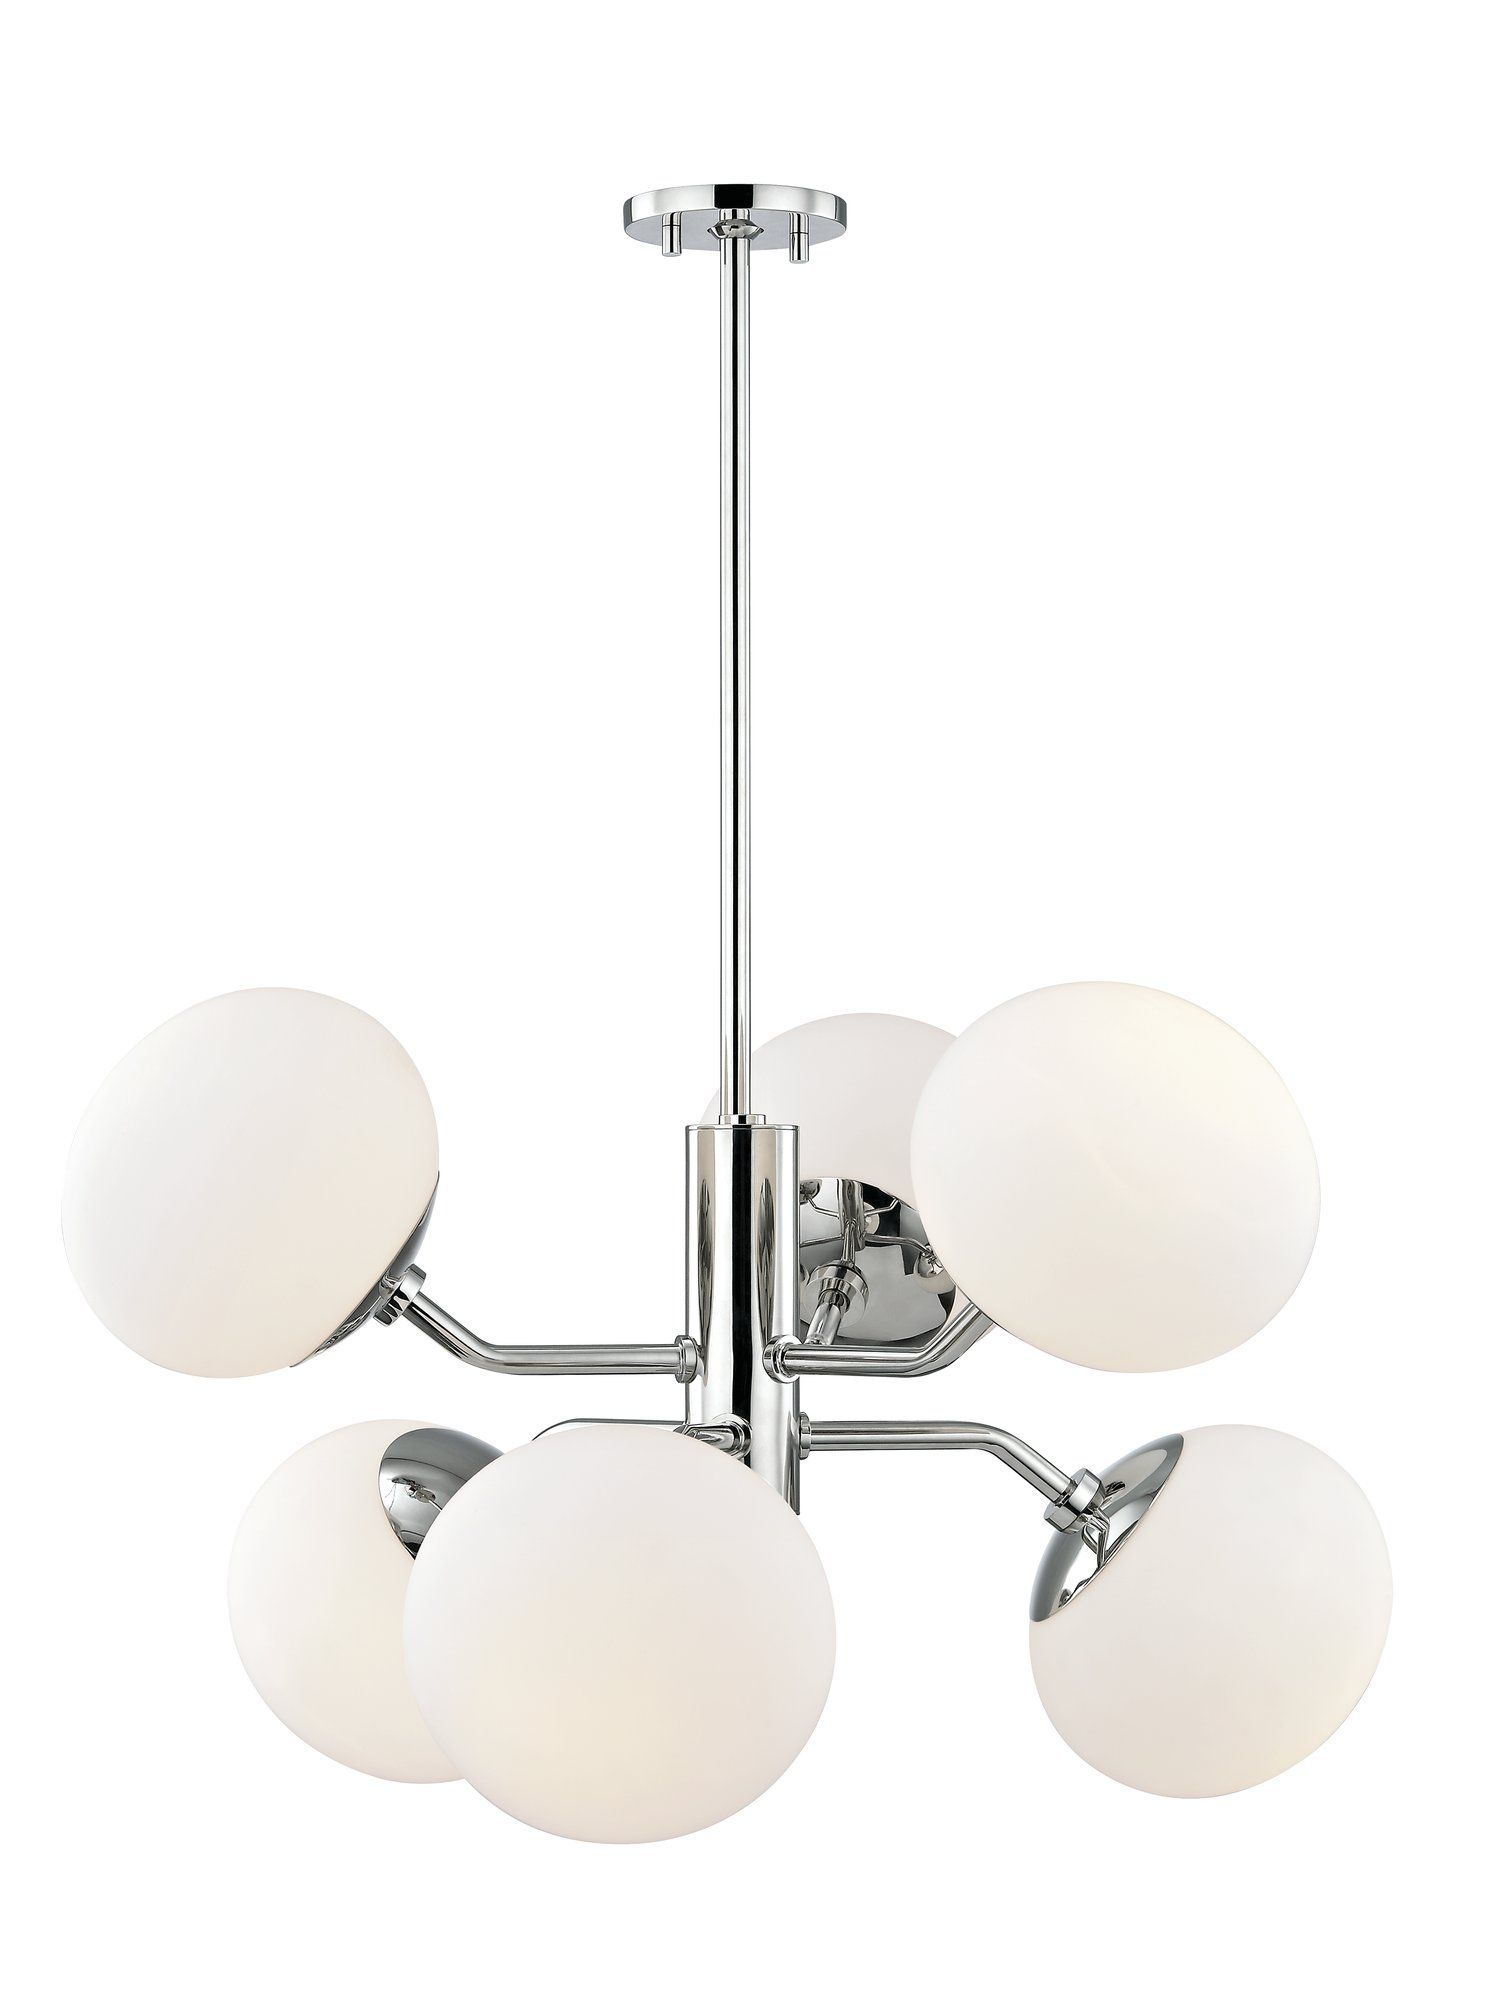 Gideon 6 Light Shaded Chandelier | Products | Chandelier Pertaining To Vroman 12 Light Sputnik Chandeliers (View 25 of 30)